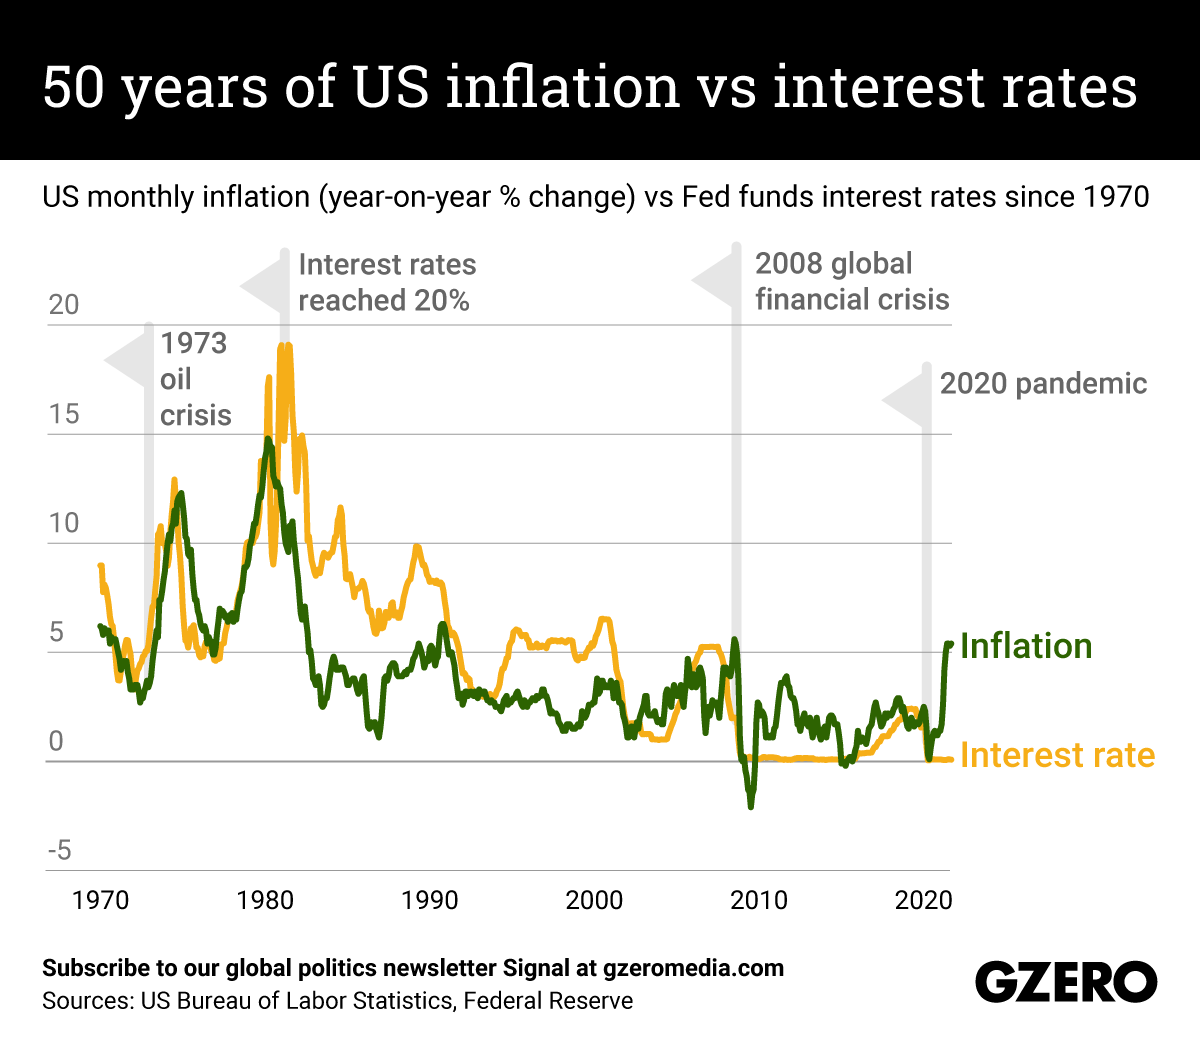 The Graphic Truth: 50 years of US inflation vs interest rates